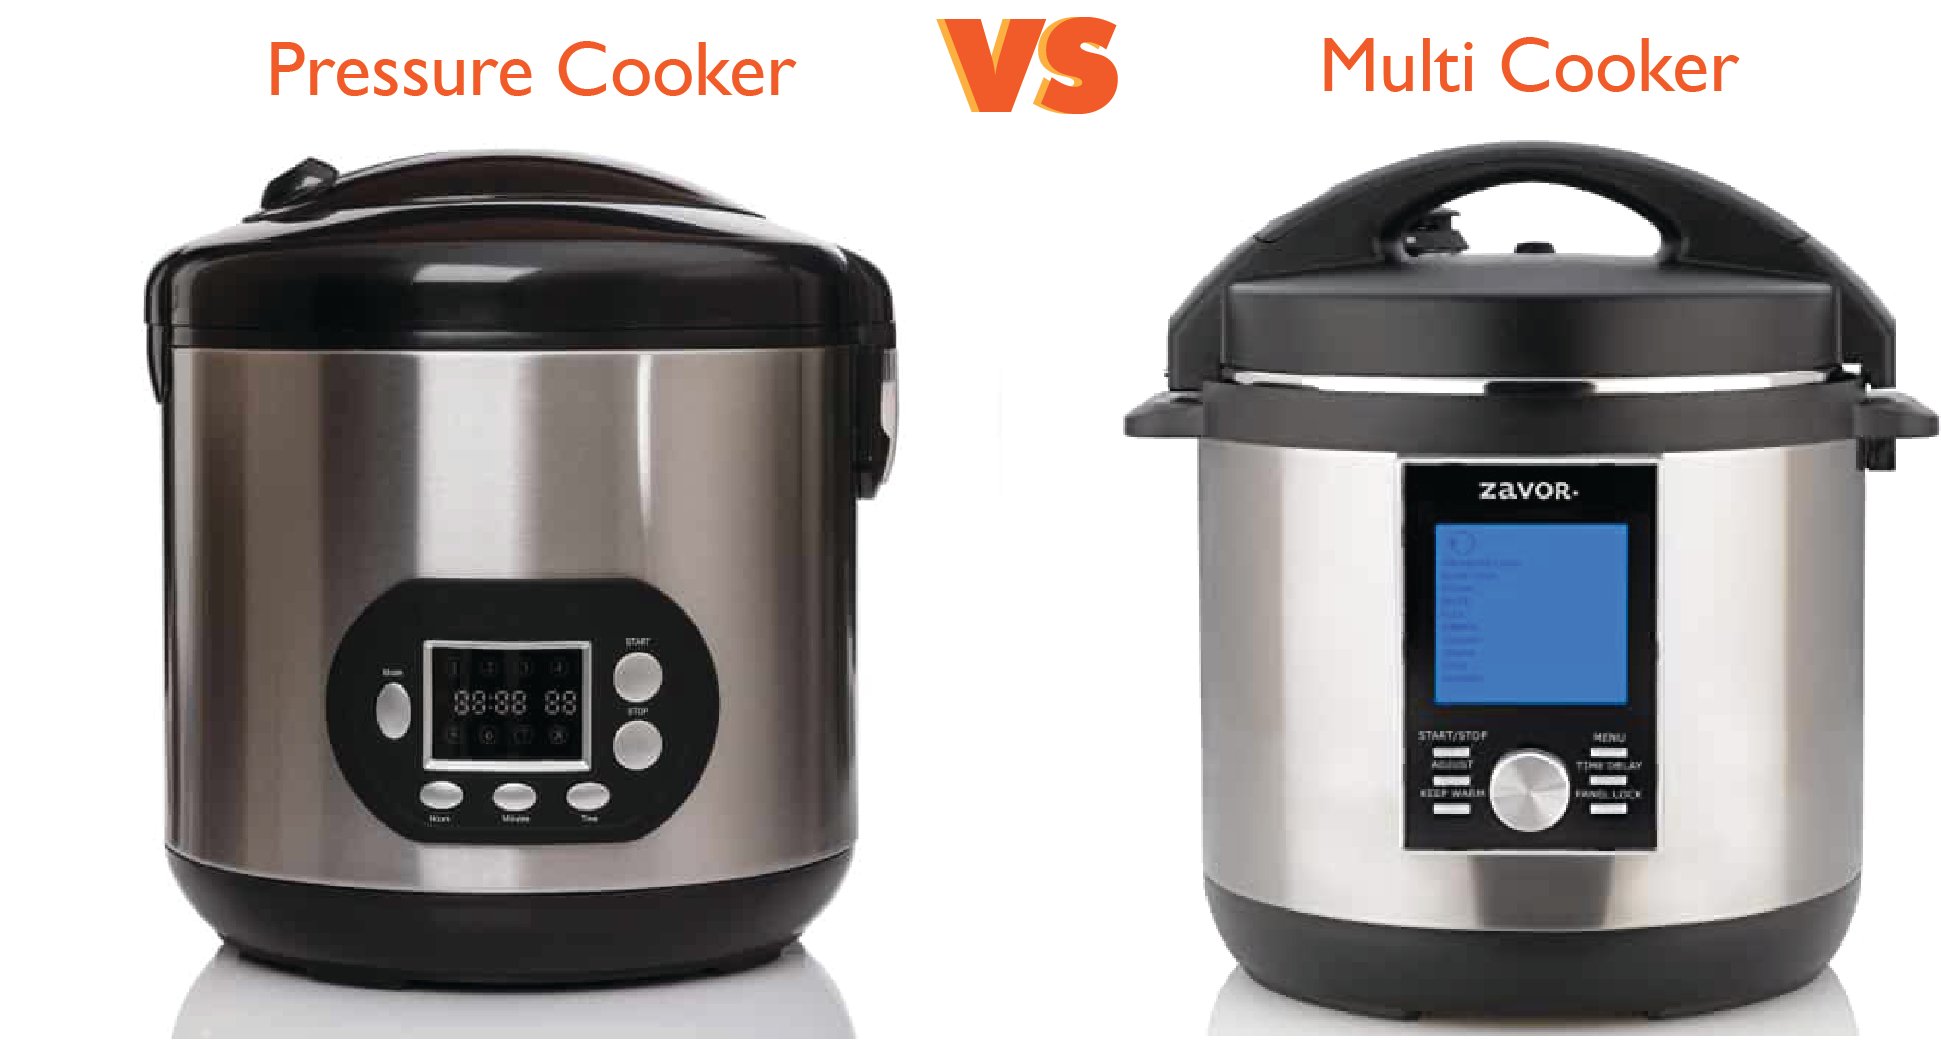 Multi Cooker vs. Pressure Cooker: Which is Best For Your Lifestyle?